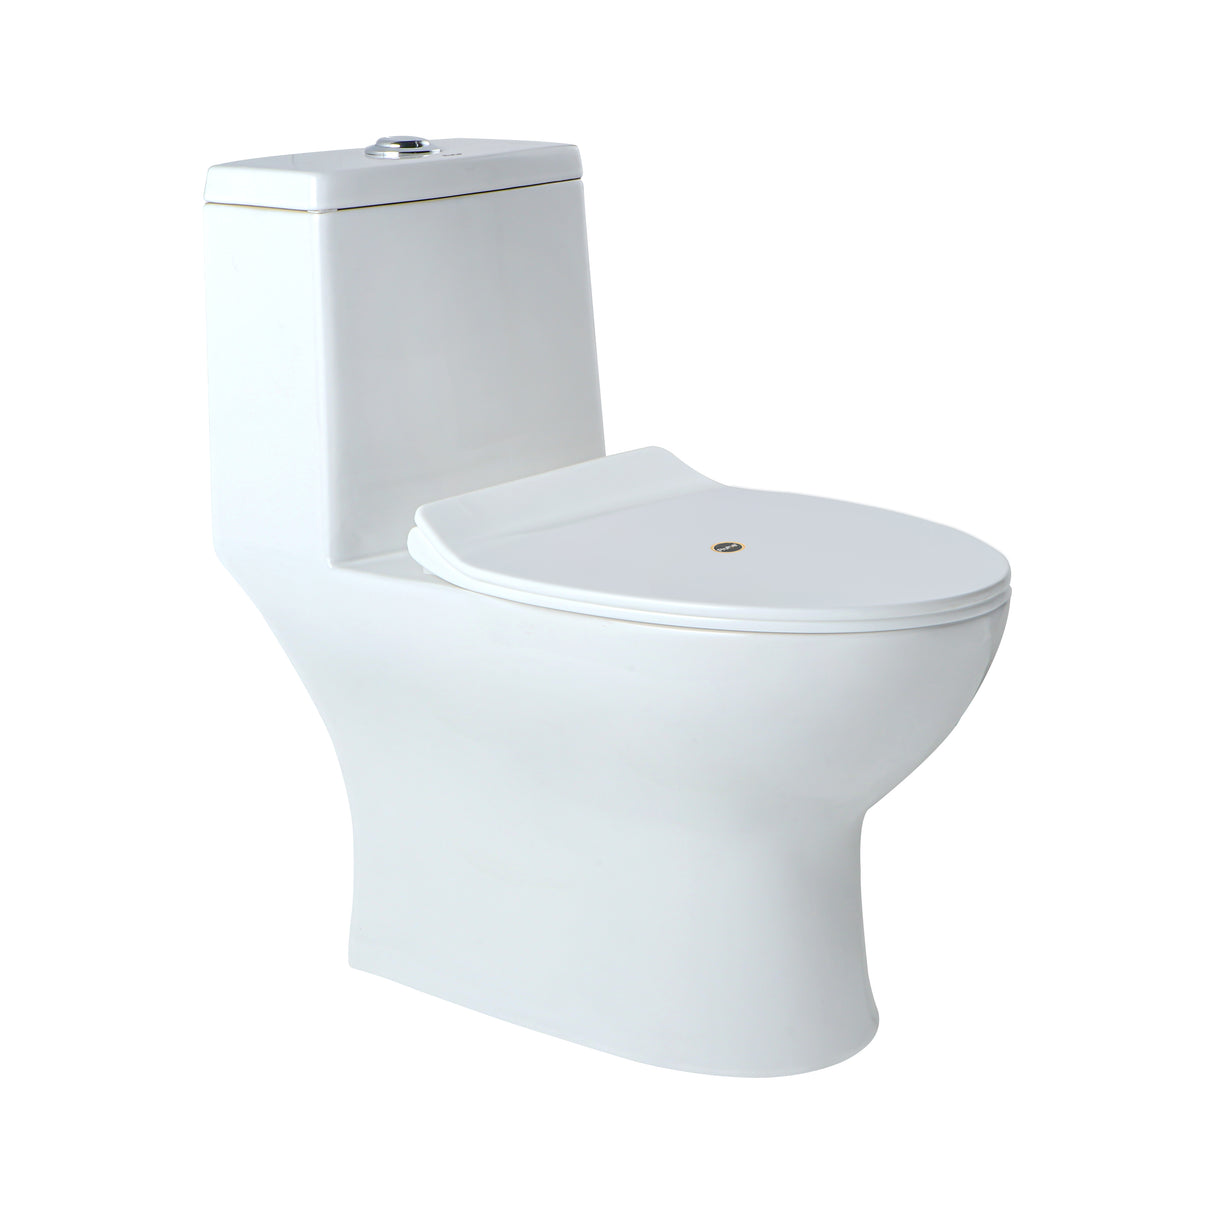 Space Western Toilet / Commode (One-piece EWC) - by Ruhe